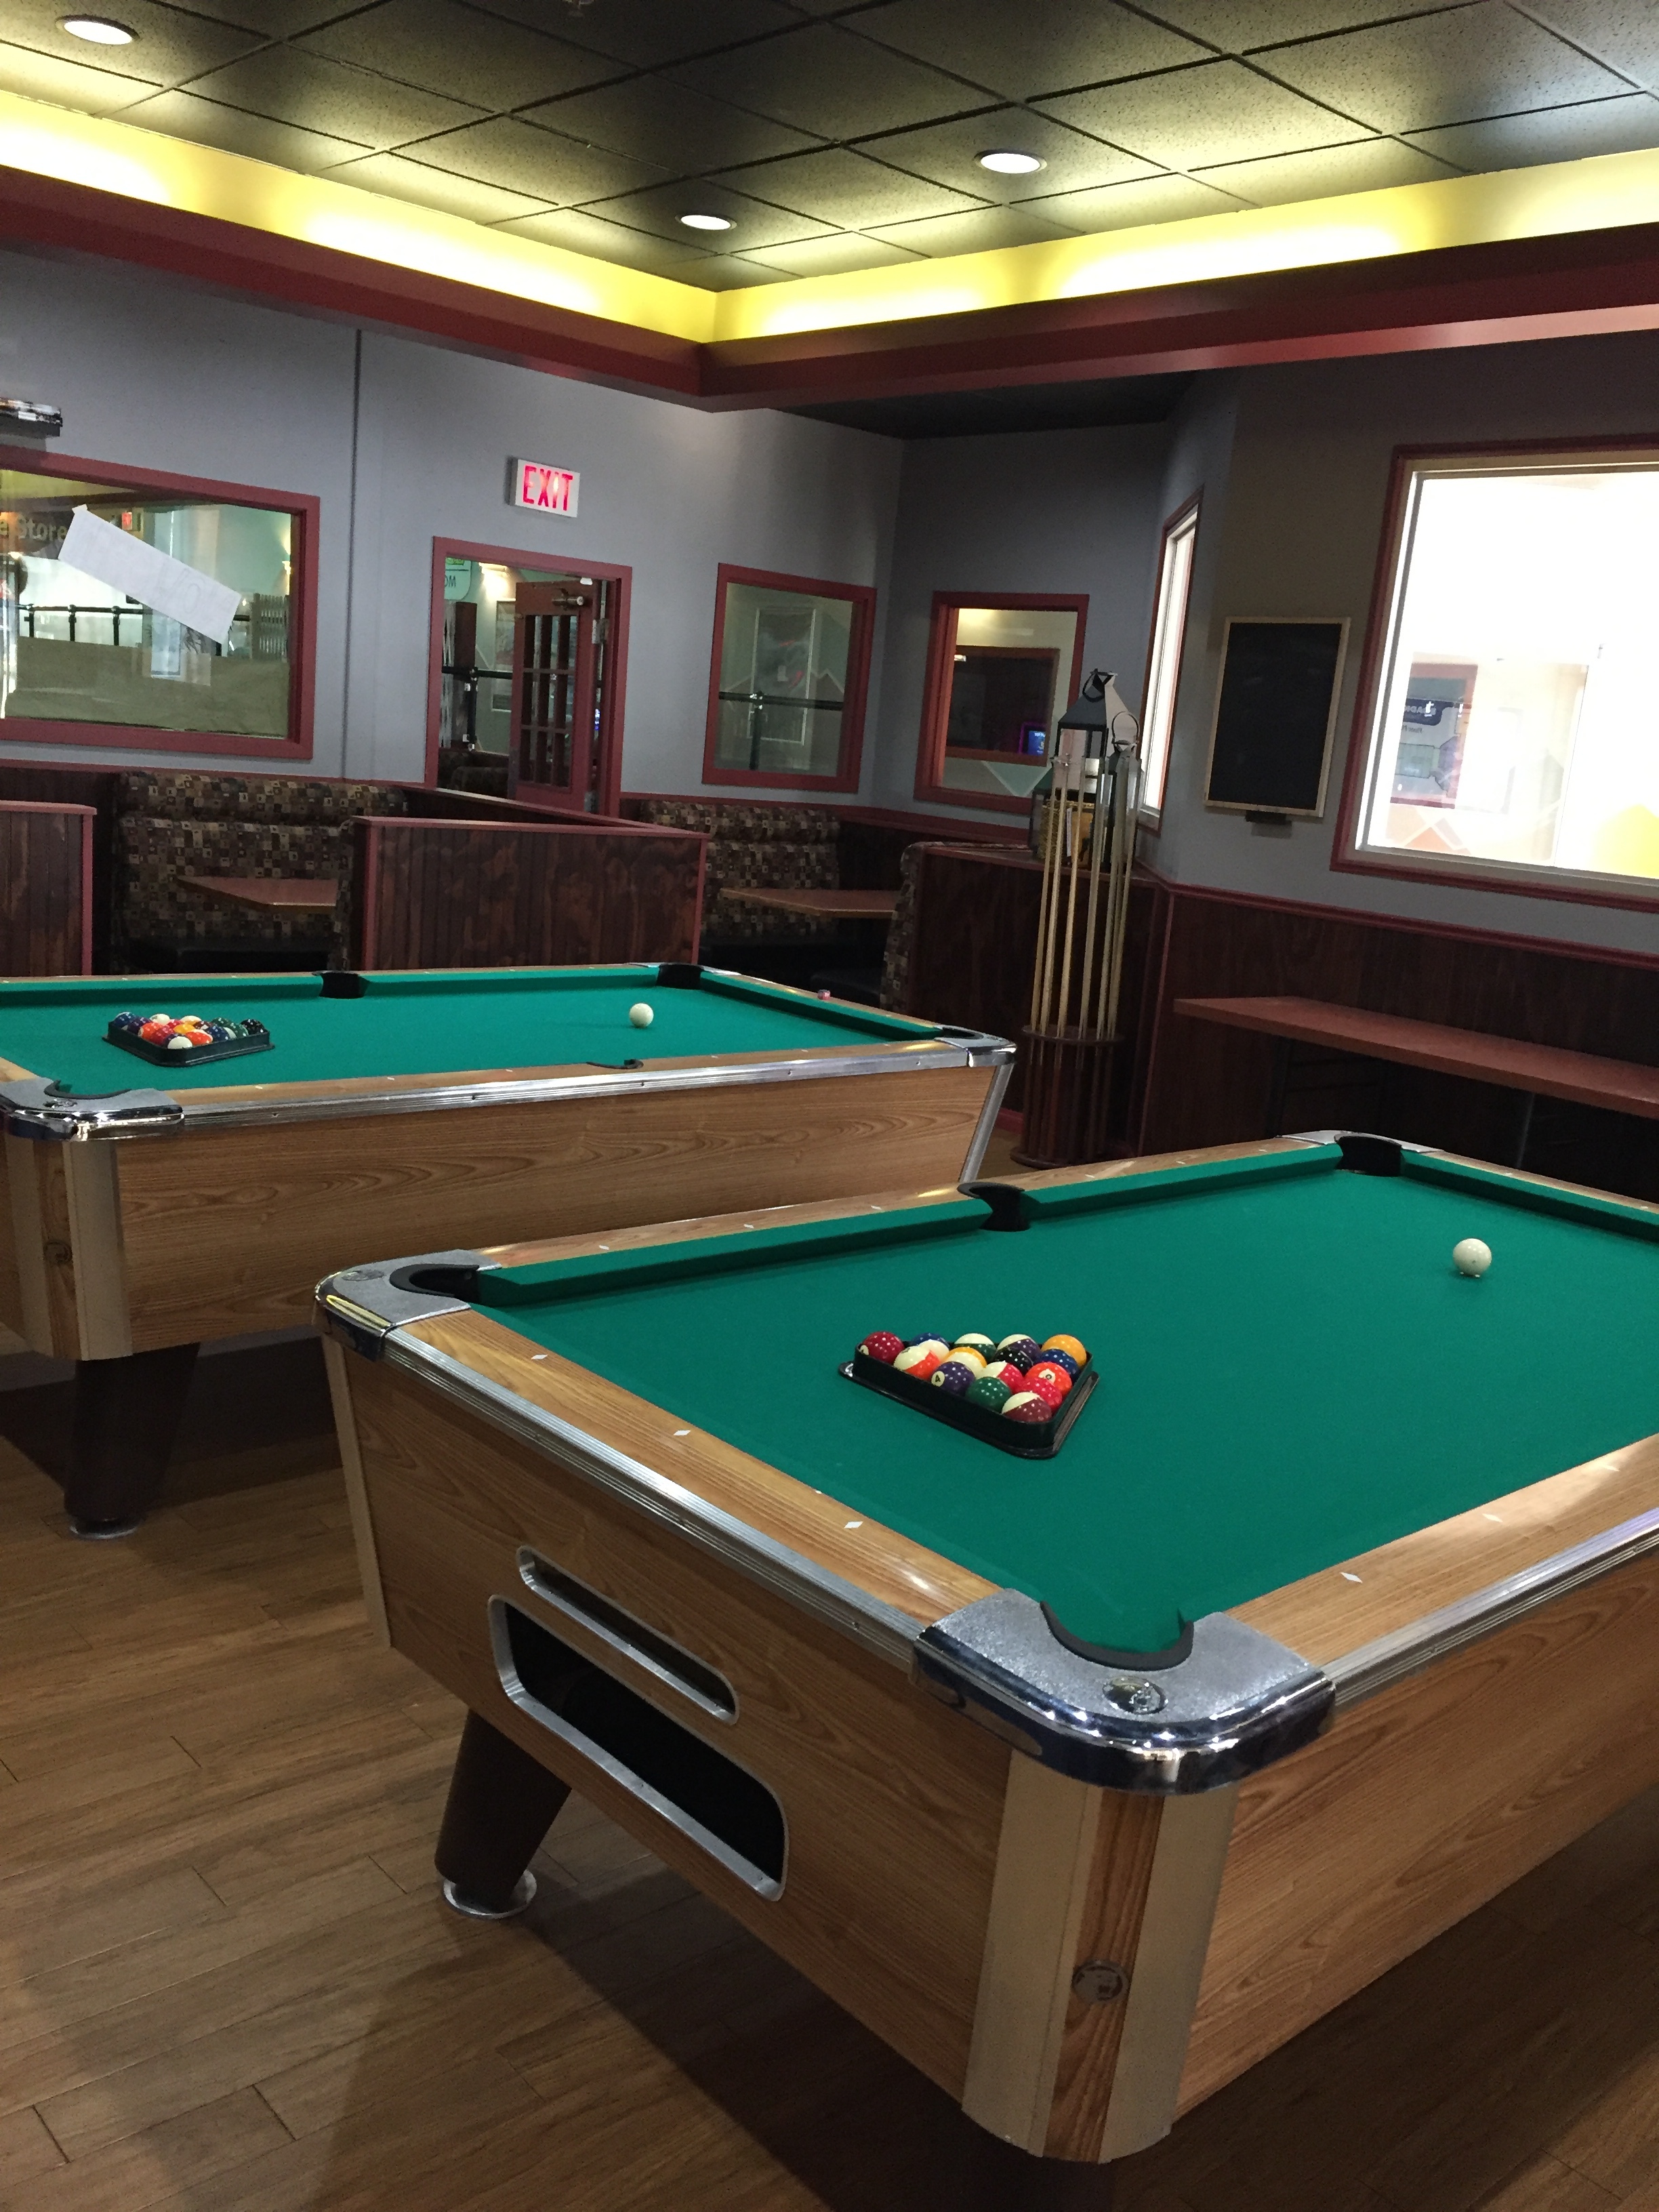 Pool hall with TV, serving food and drinks